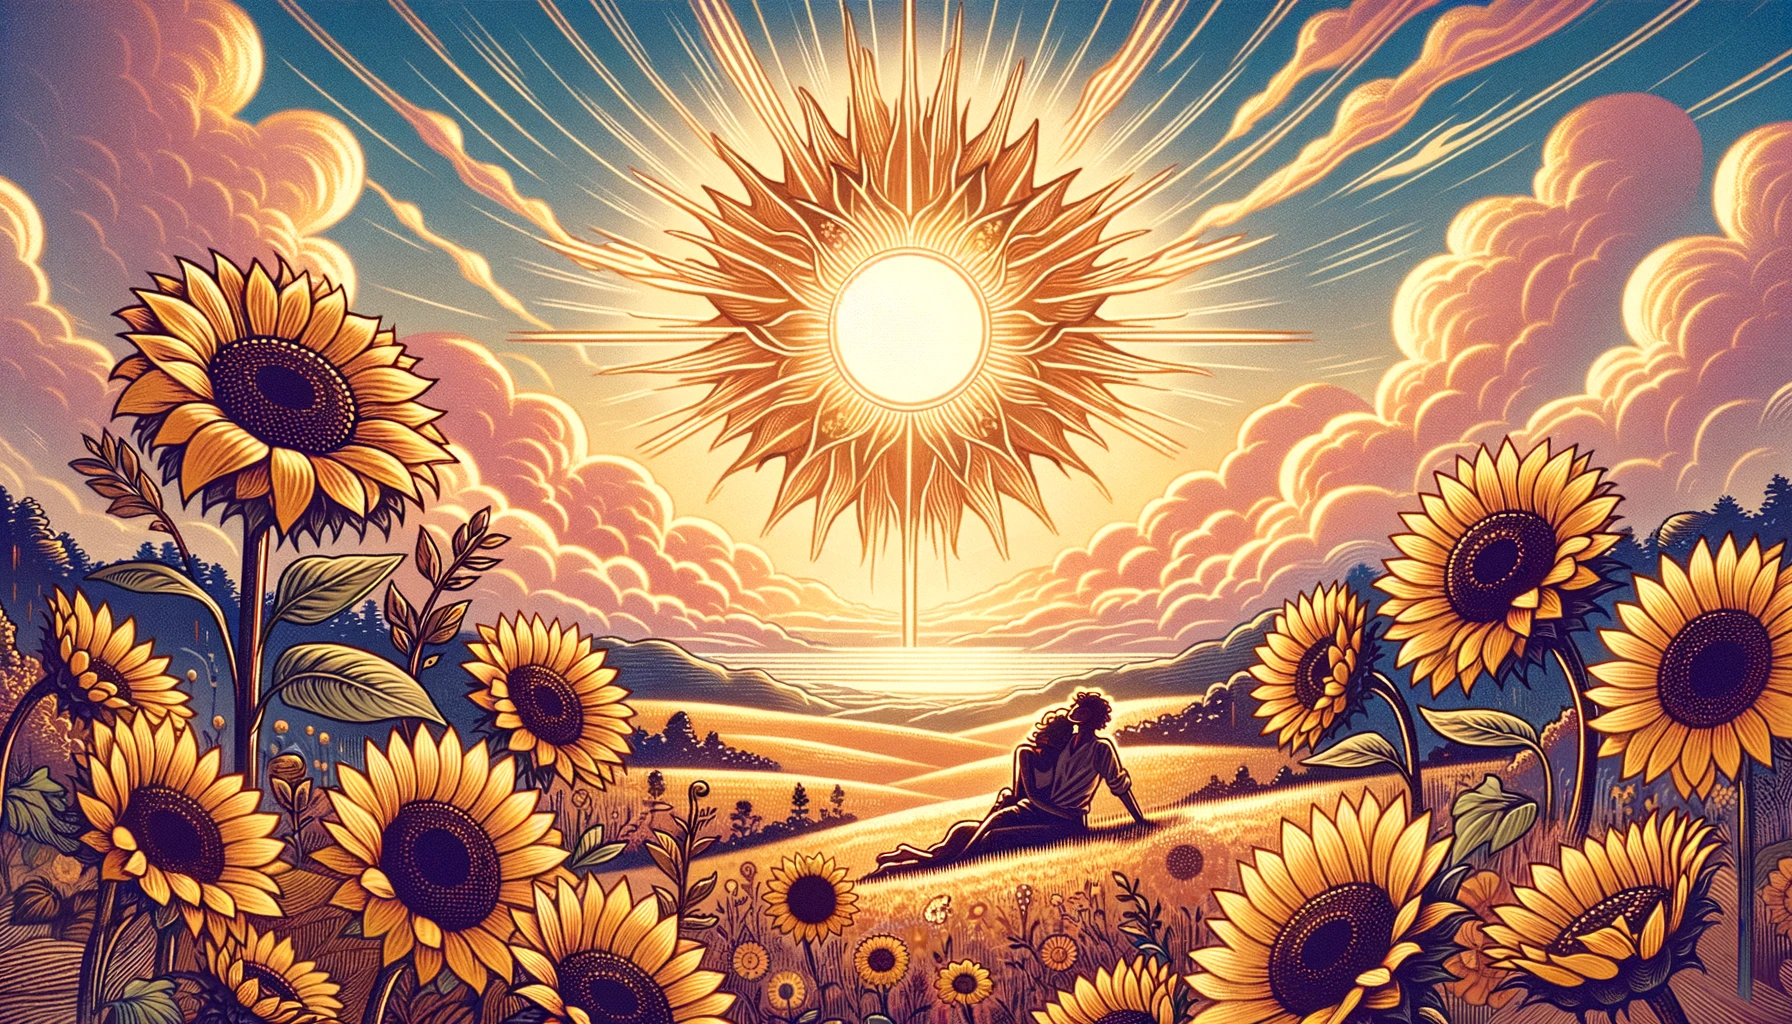 "Images reflecting the radiant and life-affirming energy of 'The Sun' Tarot card, symbolizing warmth, happiness, and fulfillment. Represents feelings of joy, optimism, and the warmth of human connections, highlighting the satisfaction of deep emotional bonds and the celebration of life's blessings."